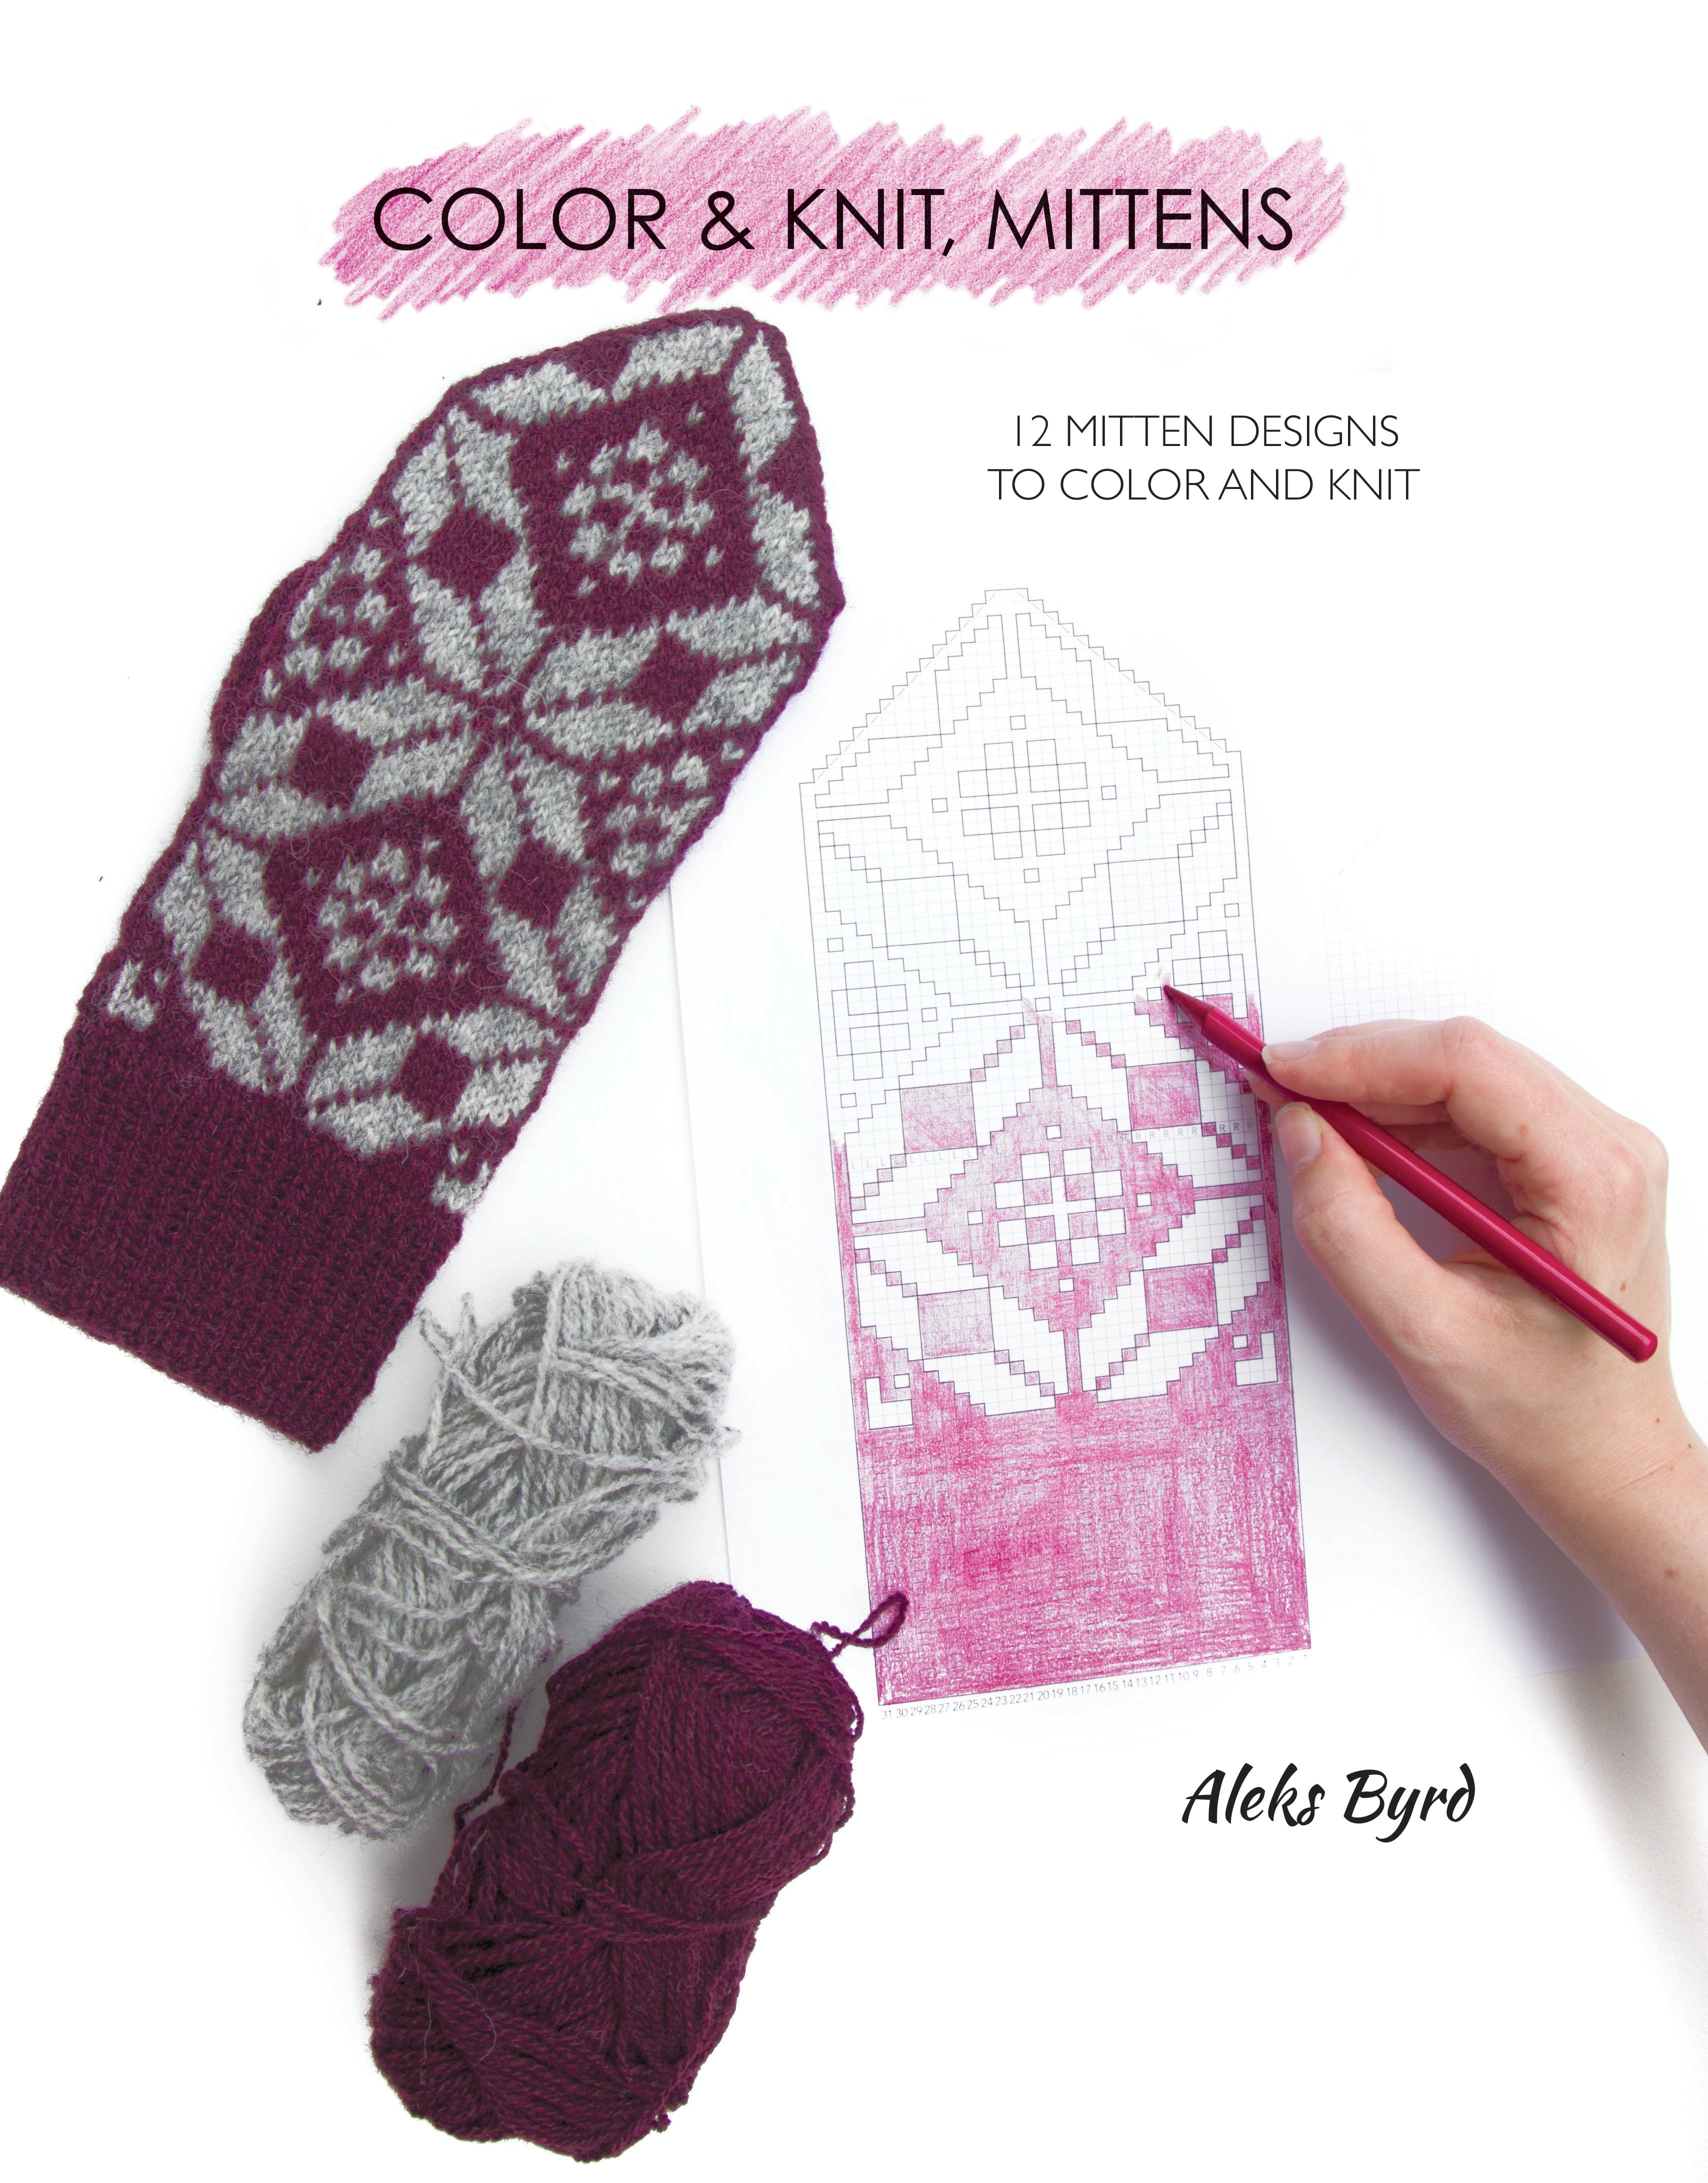 Download Color & Knit Mittens by Aleks Byrd - A Yarn Story